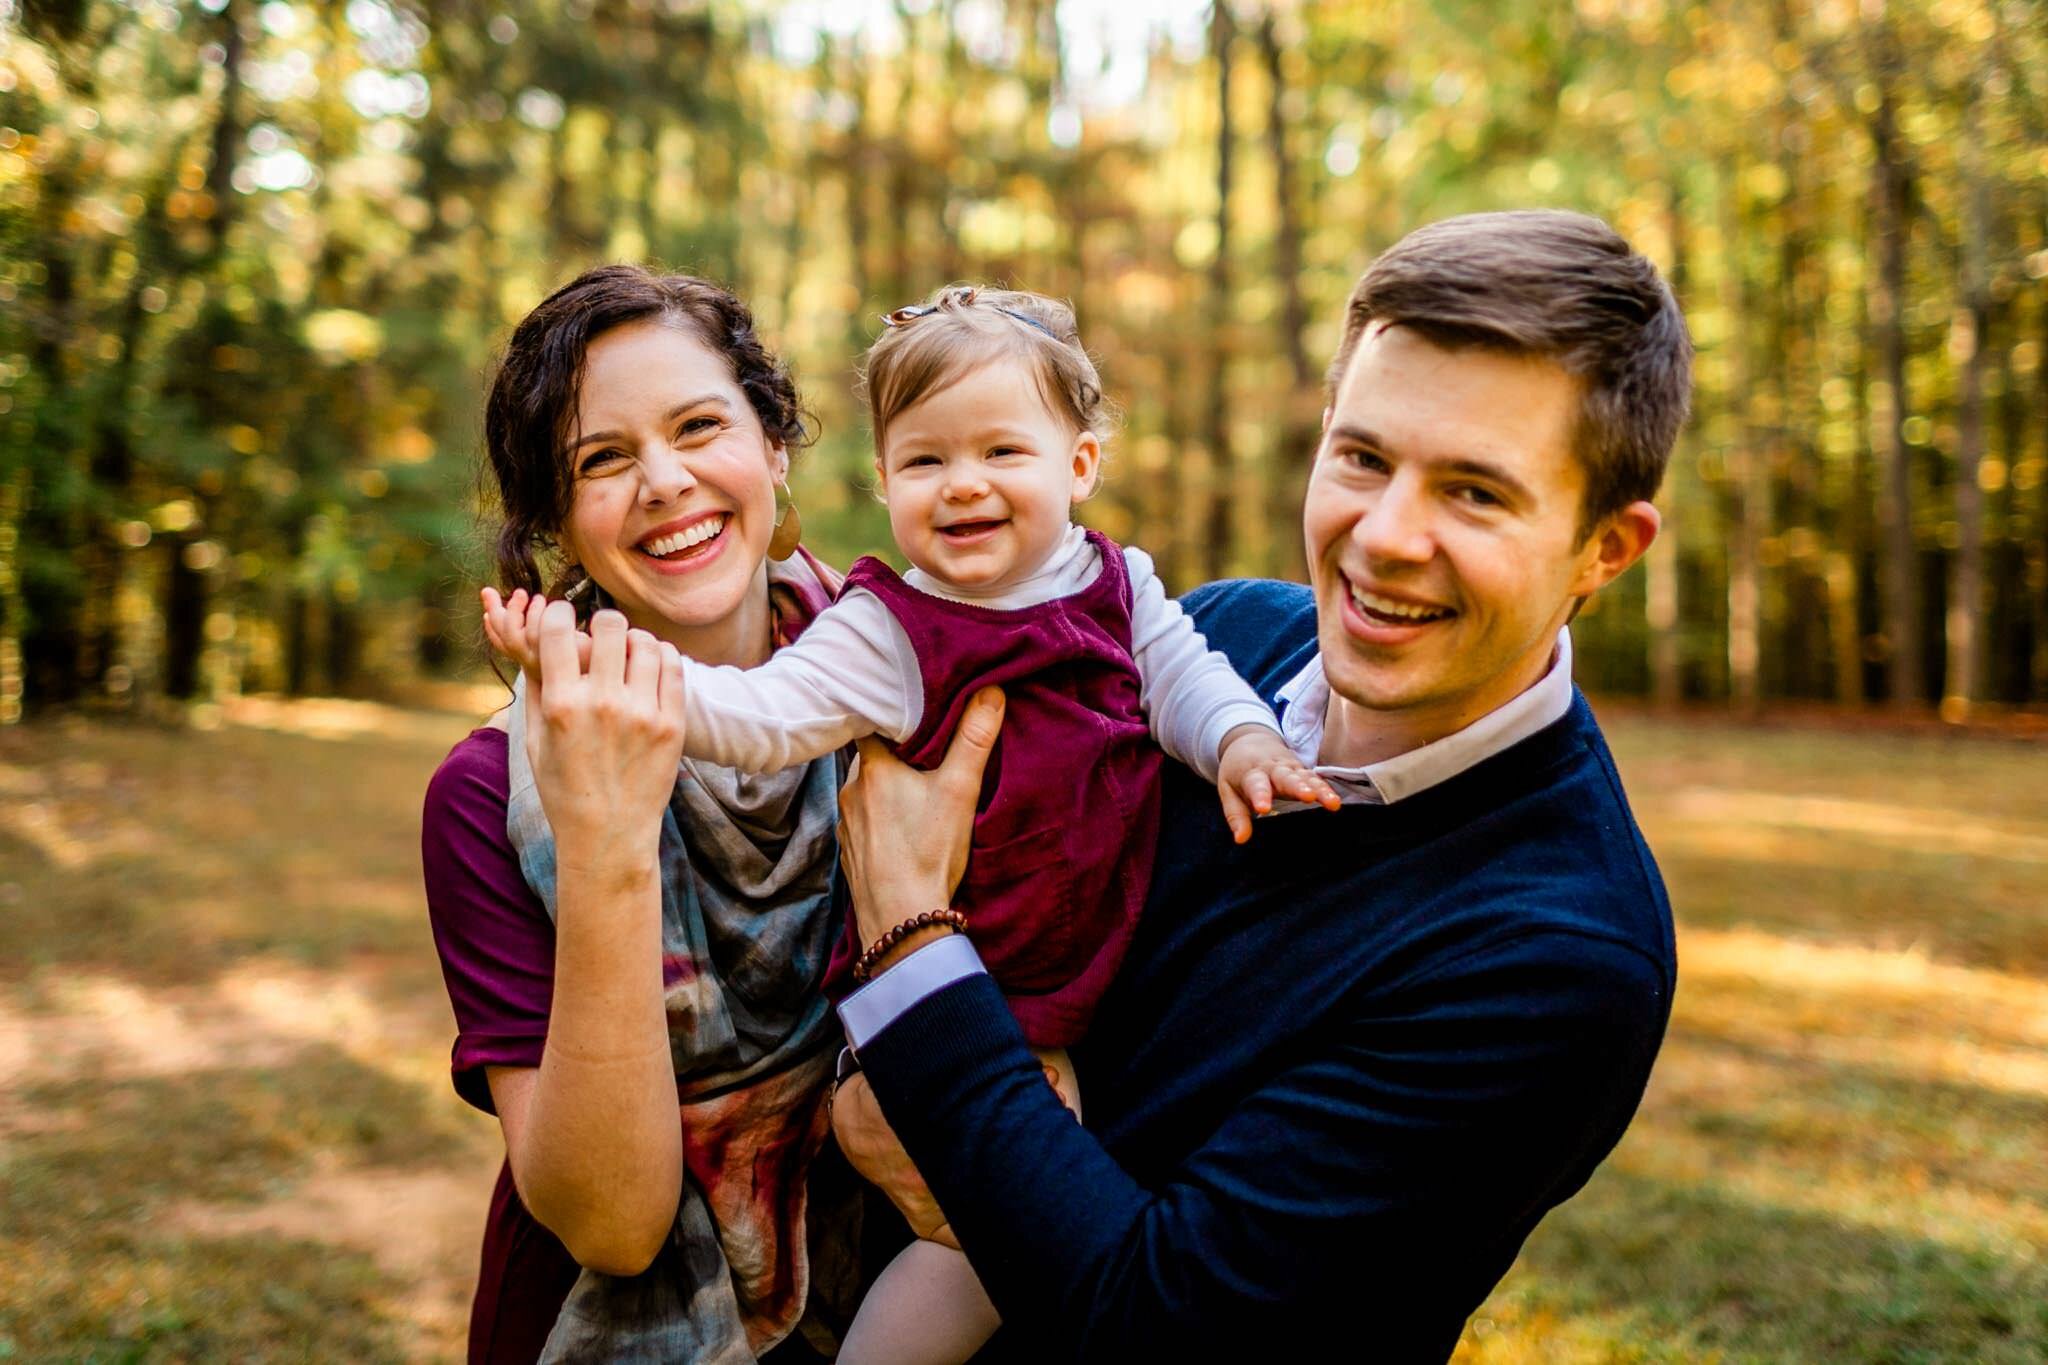 Raleigh Family Photographer | By G. Lin Photography | Umstead Park | Parents holding baby girl